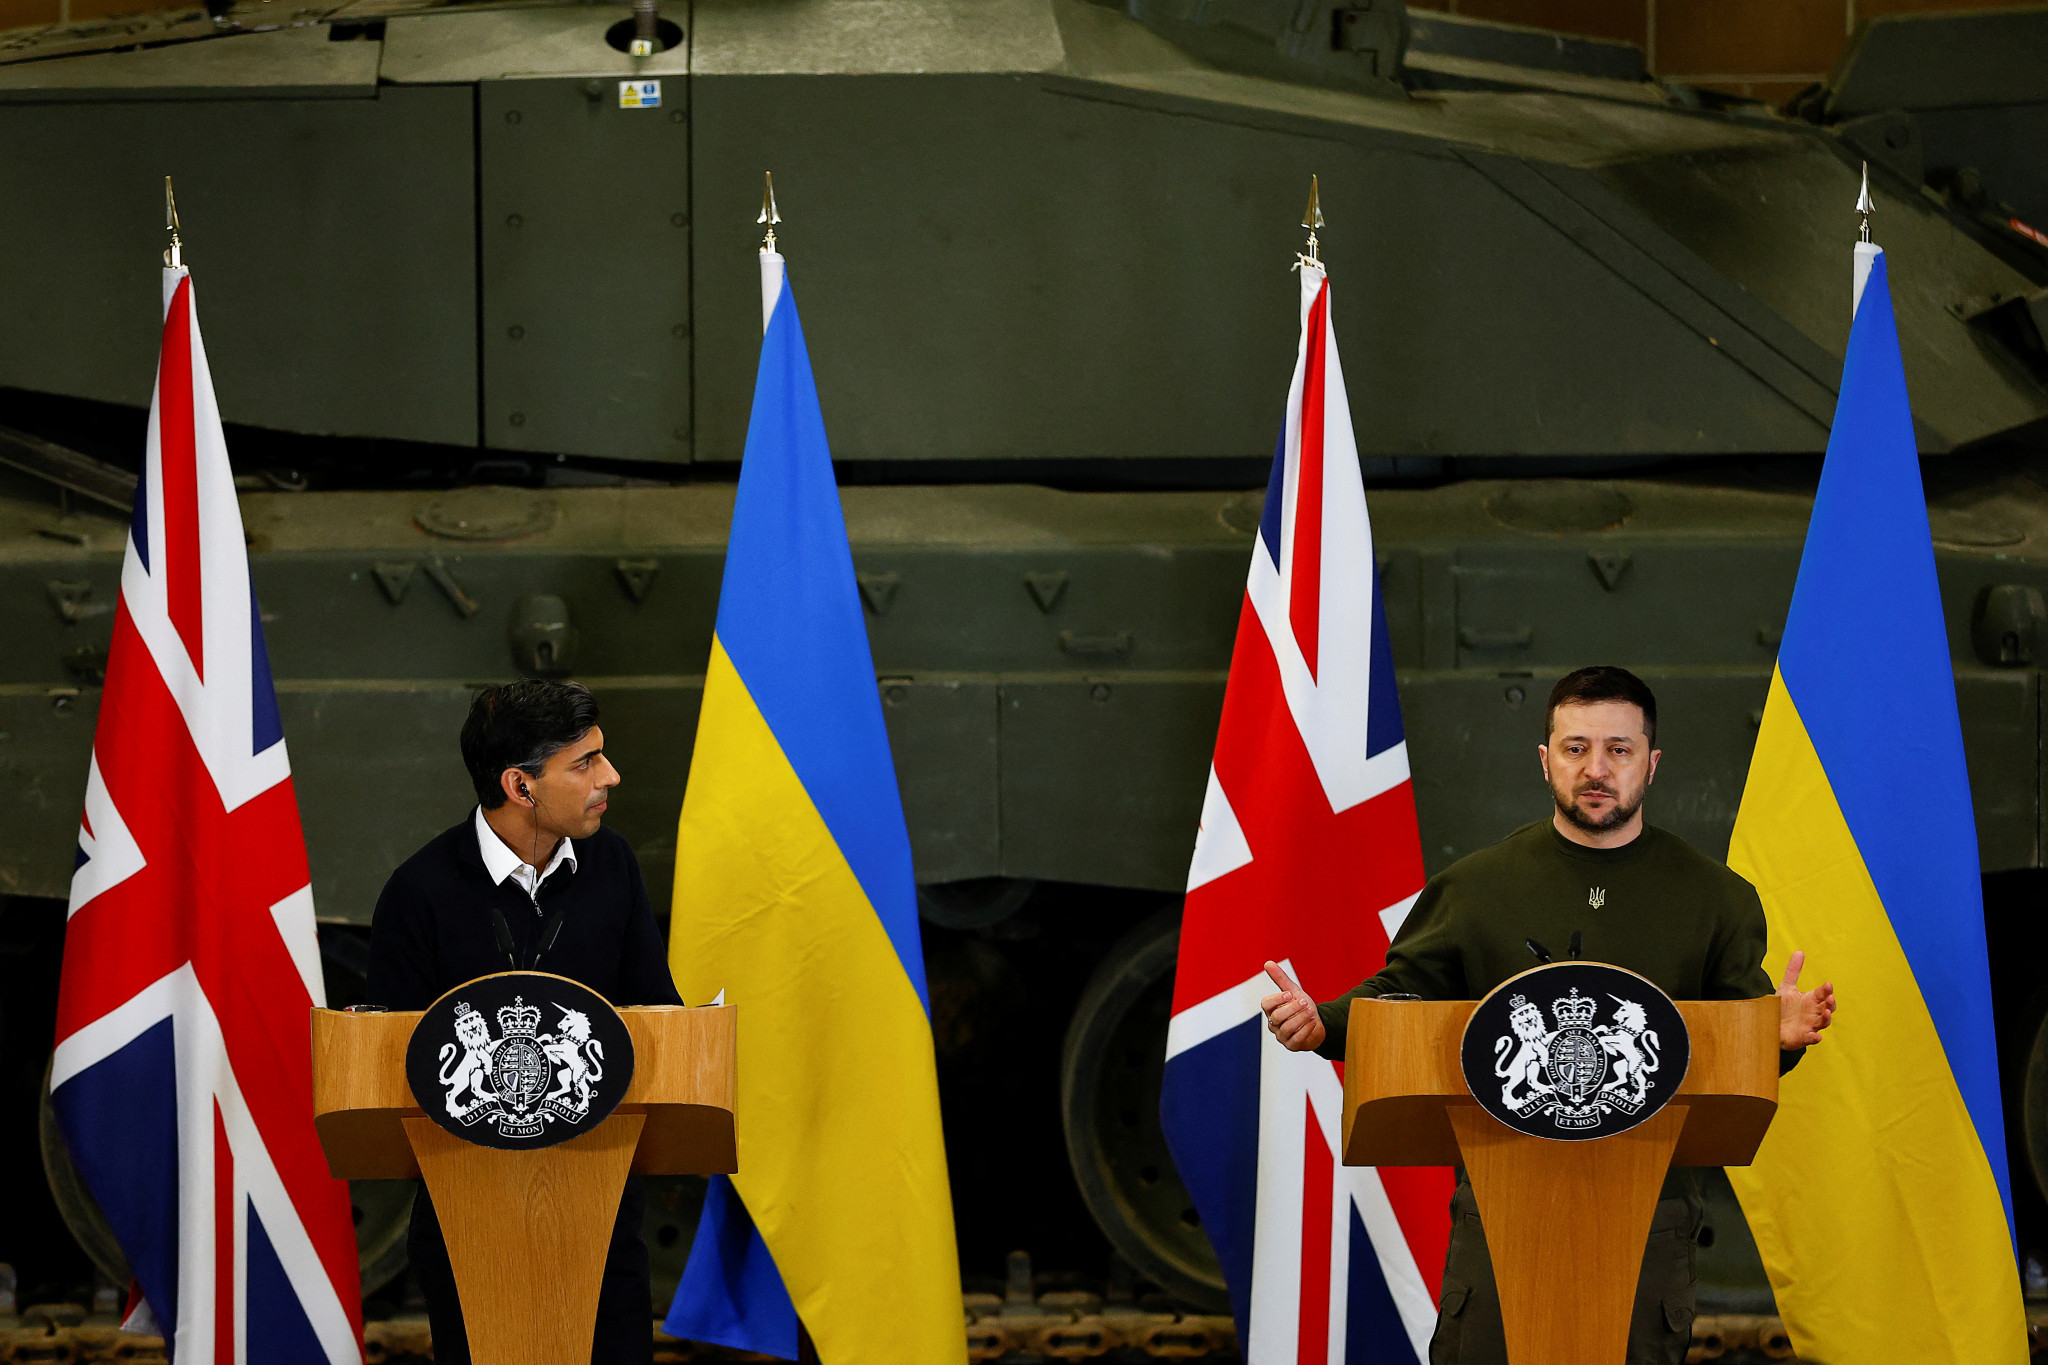 Ukrainian President Volodymyr Zelenskyy, right, visited London yesterday to meet United Kingdom President Rishi Sunak, left, where the Olympics was among the topics discussed ©Getty Images